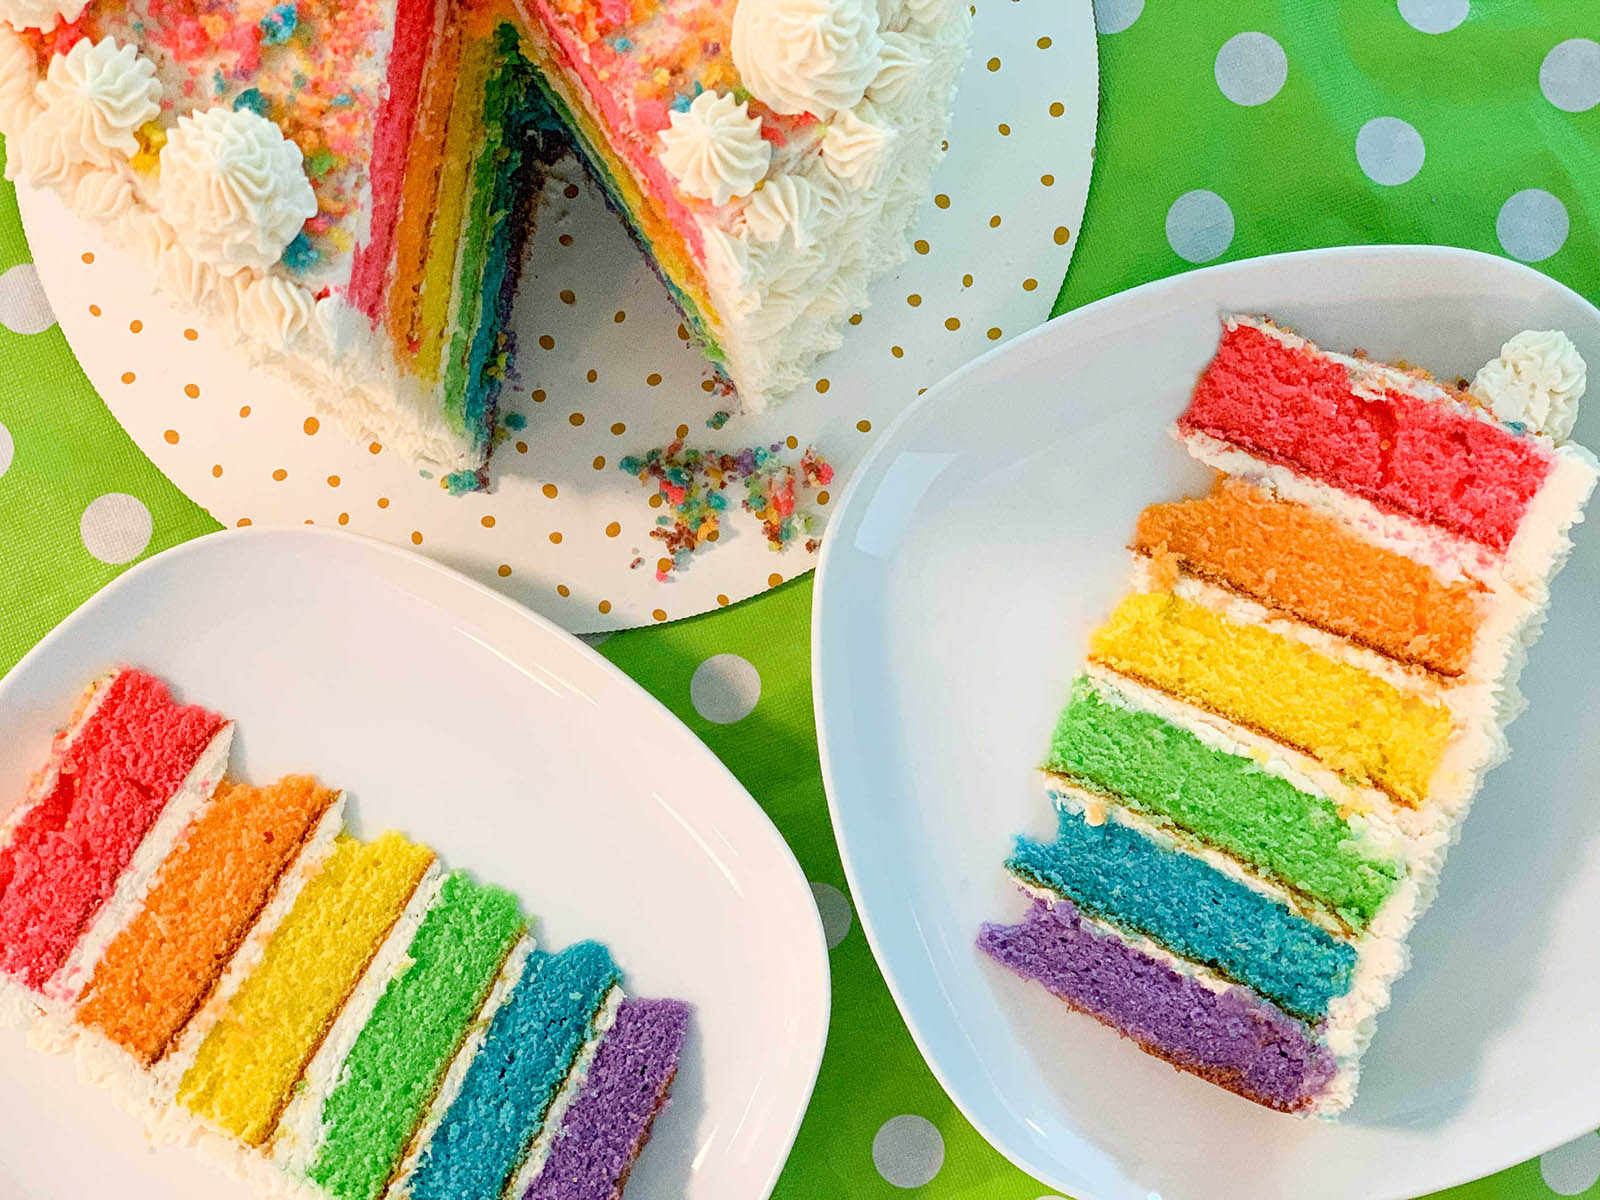 This Geography Quiz Is 🌈 Full of Color – Can You Pass It With Flying Colors? Rainbow layer cake